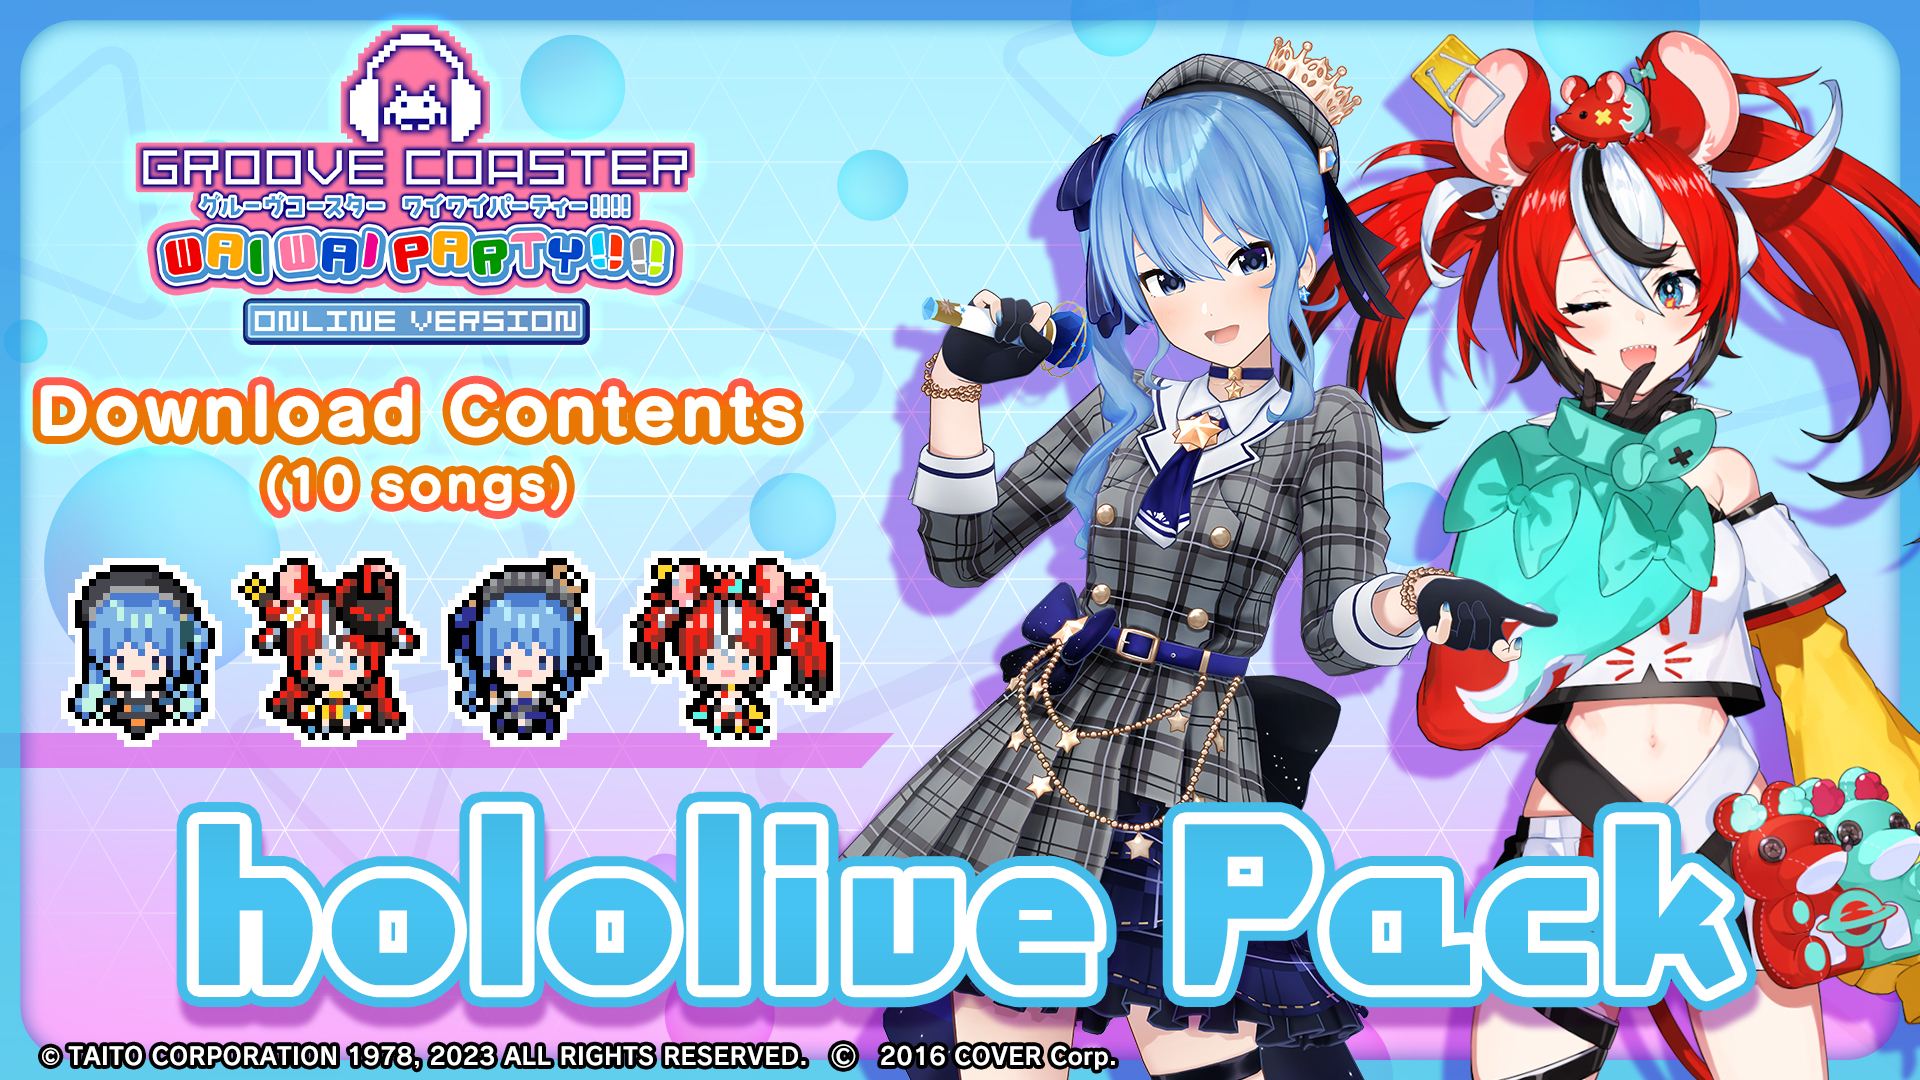 hololive Pack